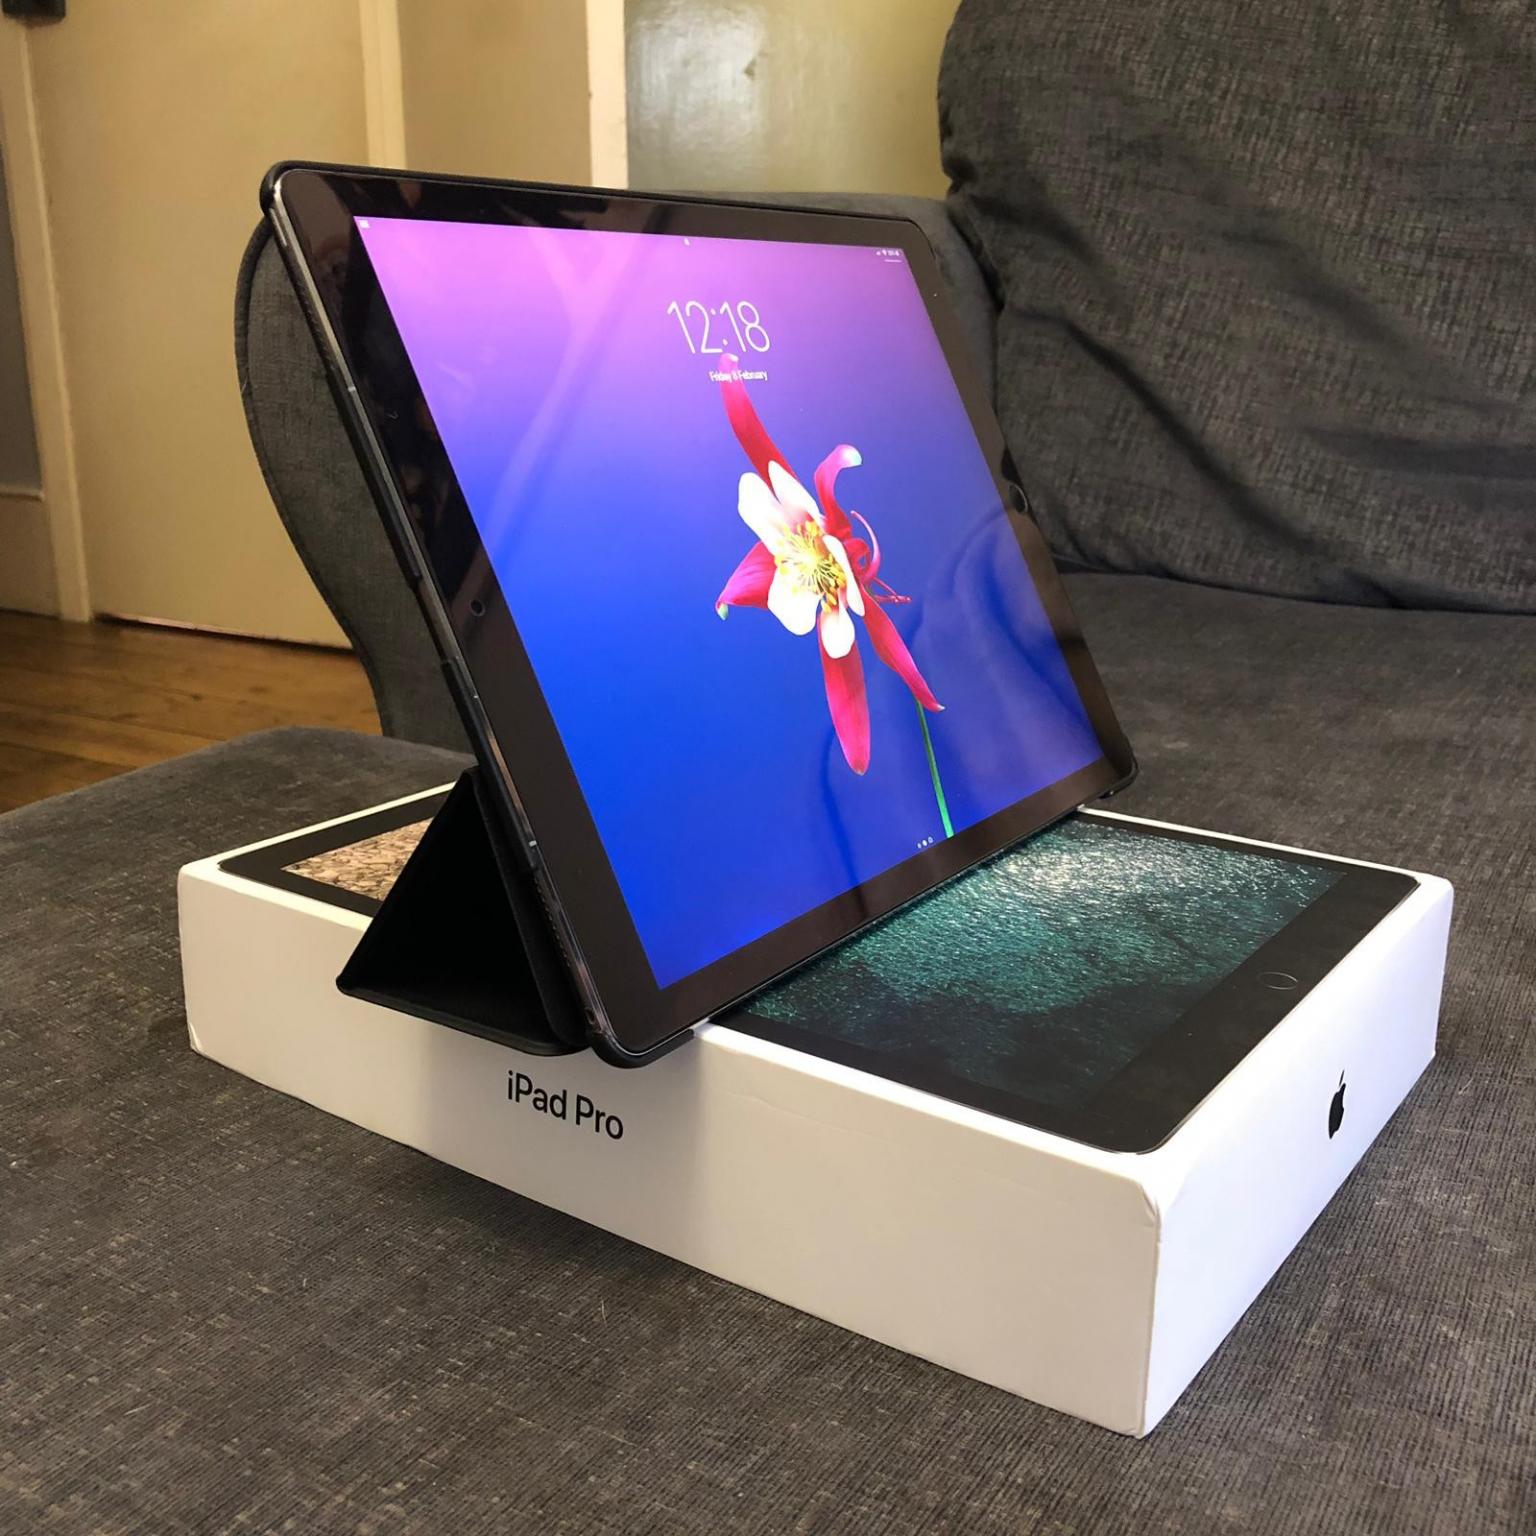 iPad Pro 12.9 2017 WiFi & Cellular EE. in NW3 London for Â£750.00 for